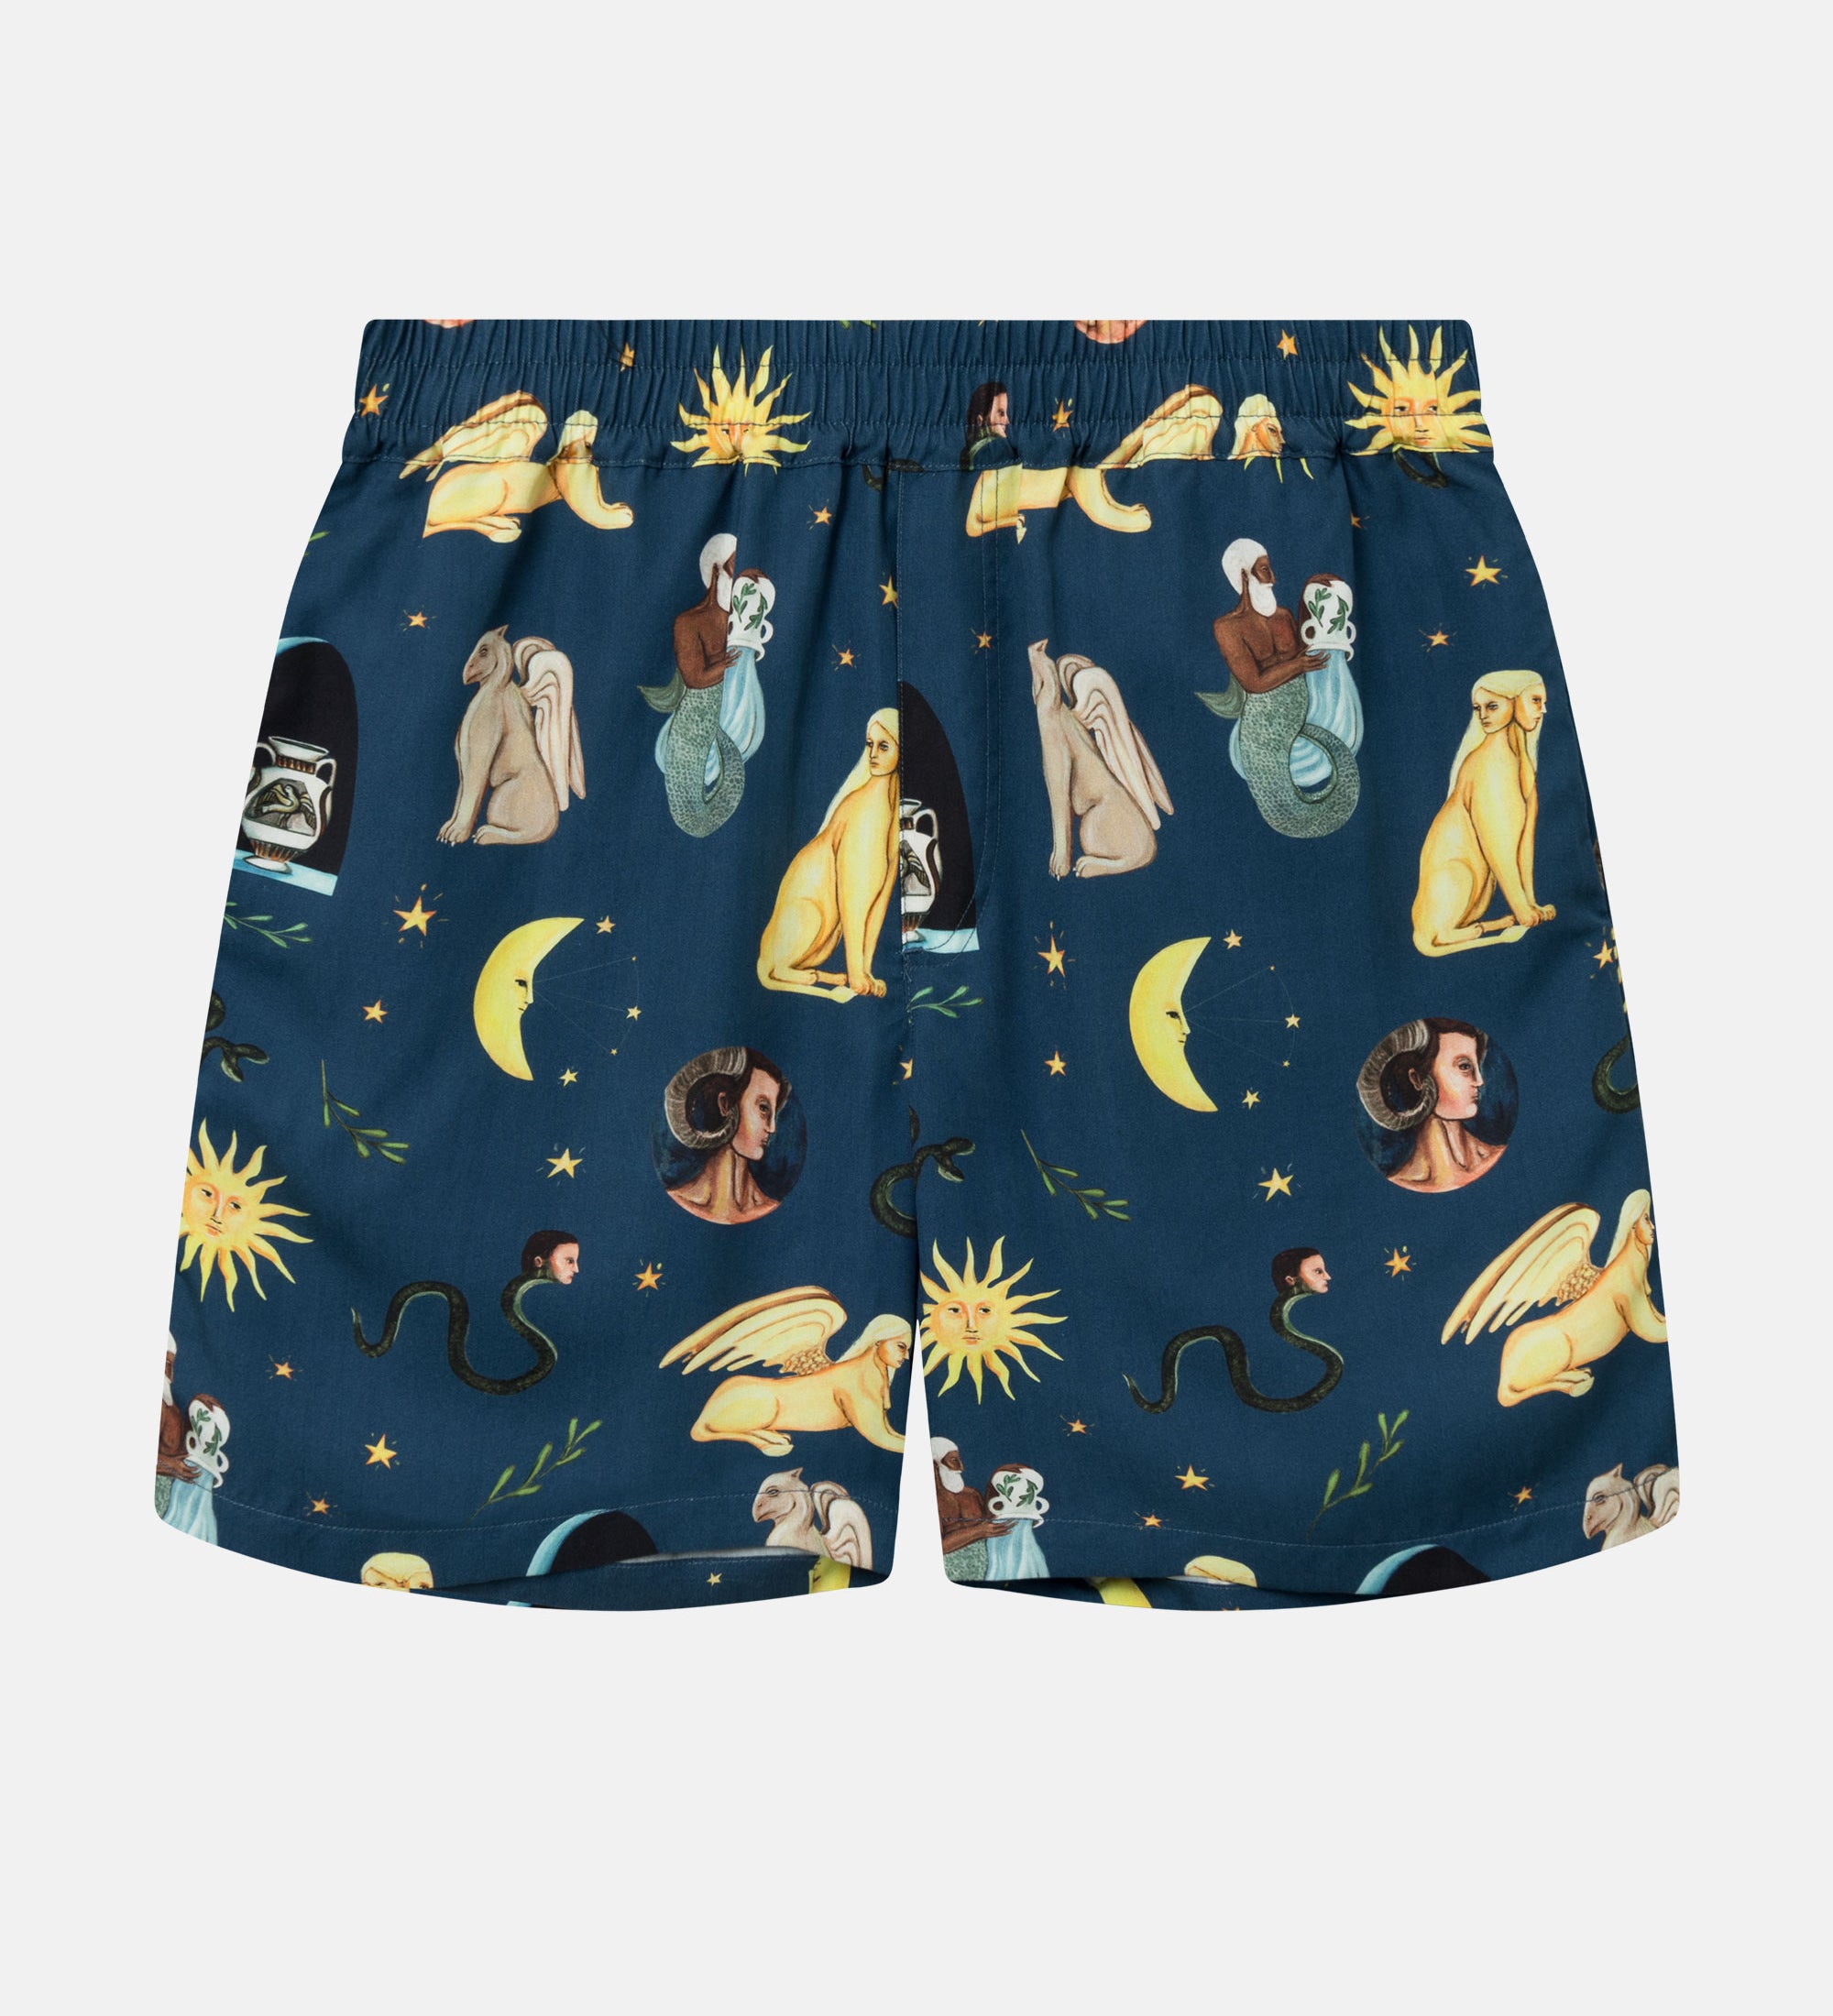 Navy vacation shorts with a multi-colored graphic pattern, two front pockets, and an elastic drawstring.